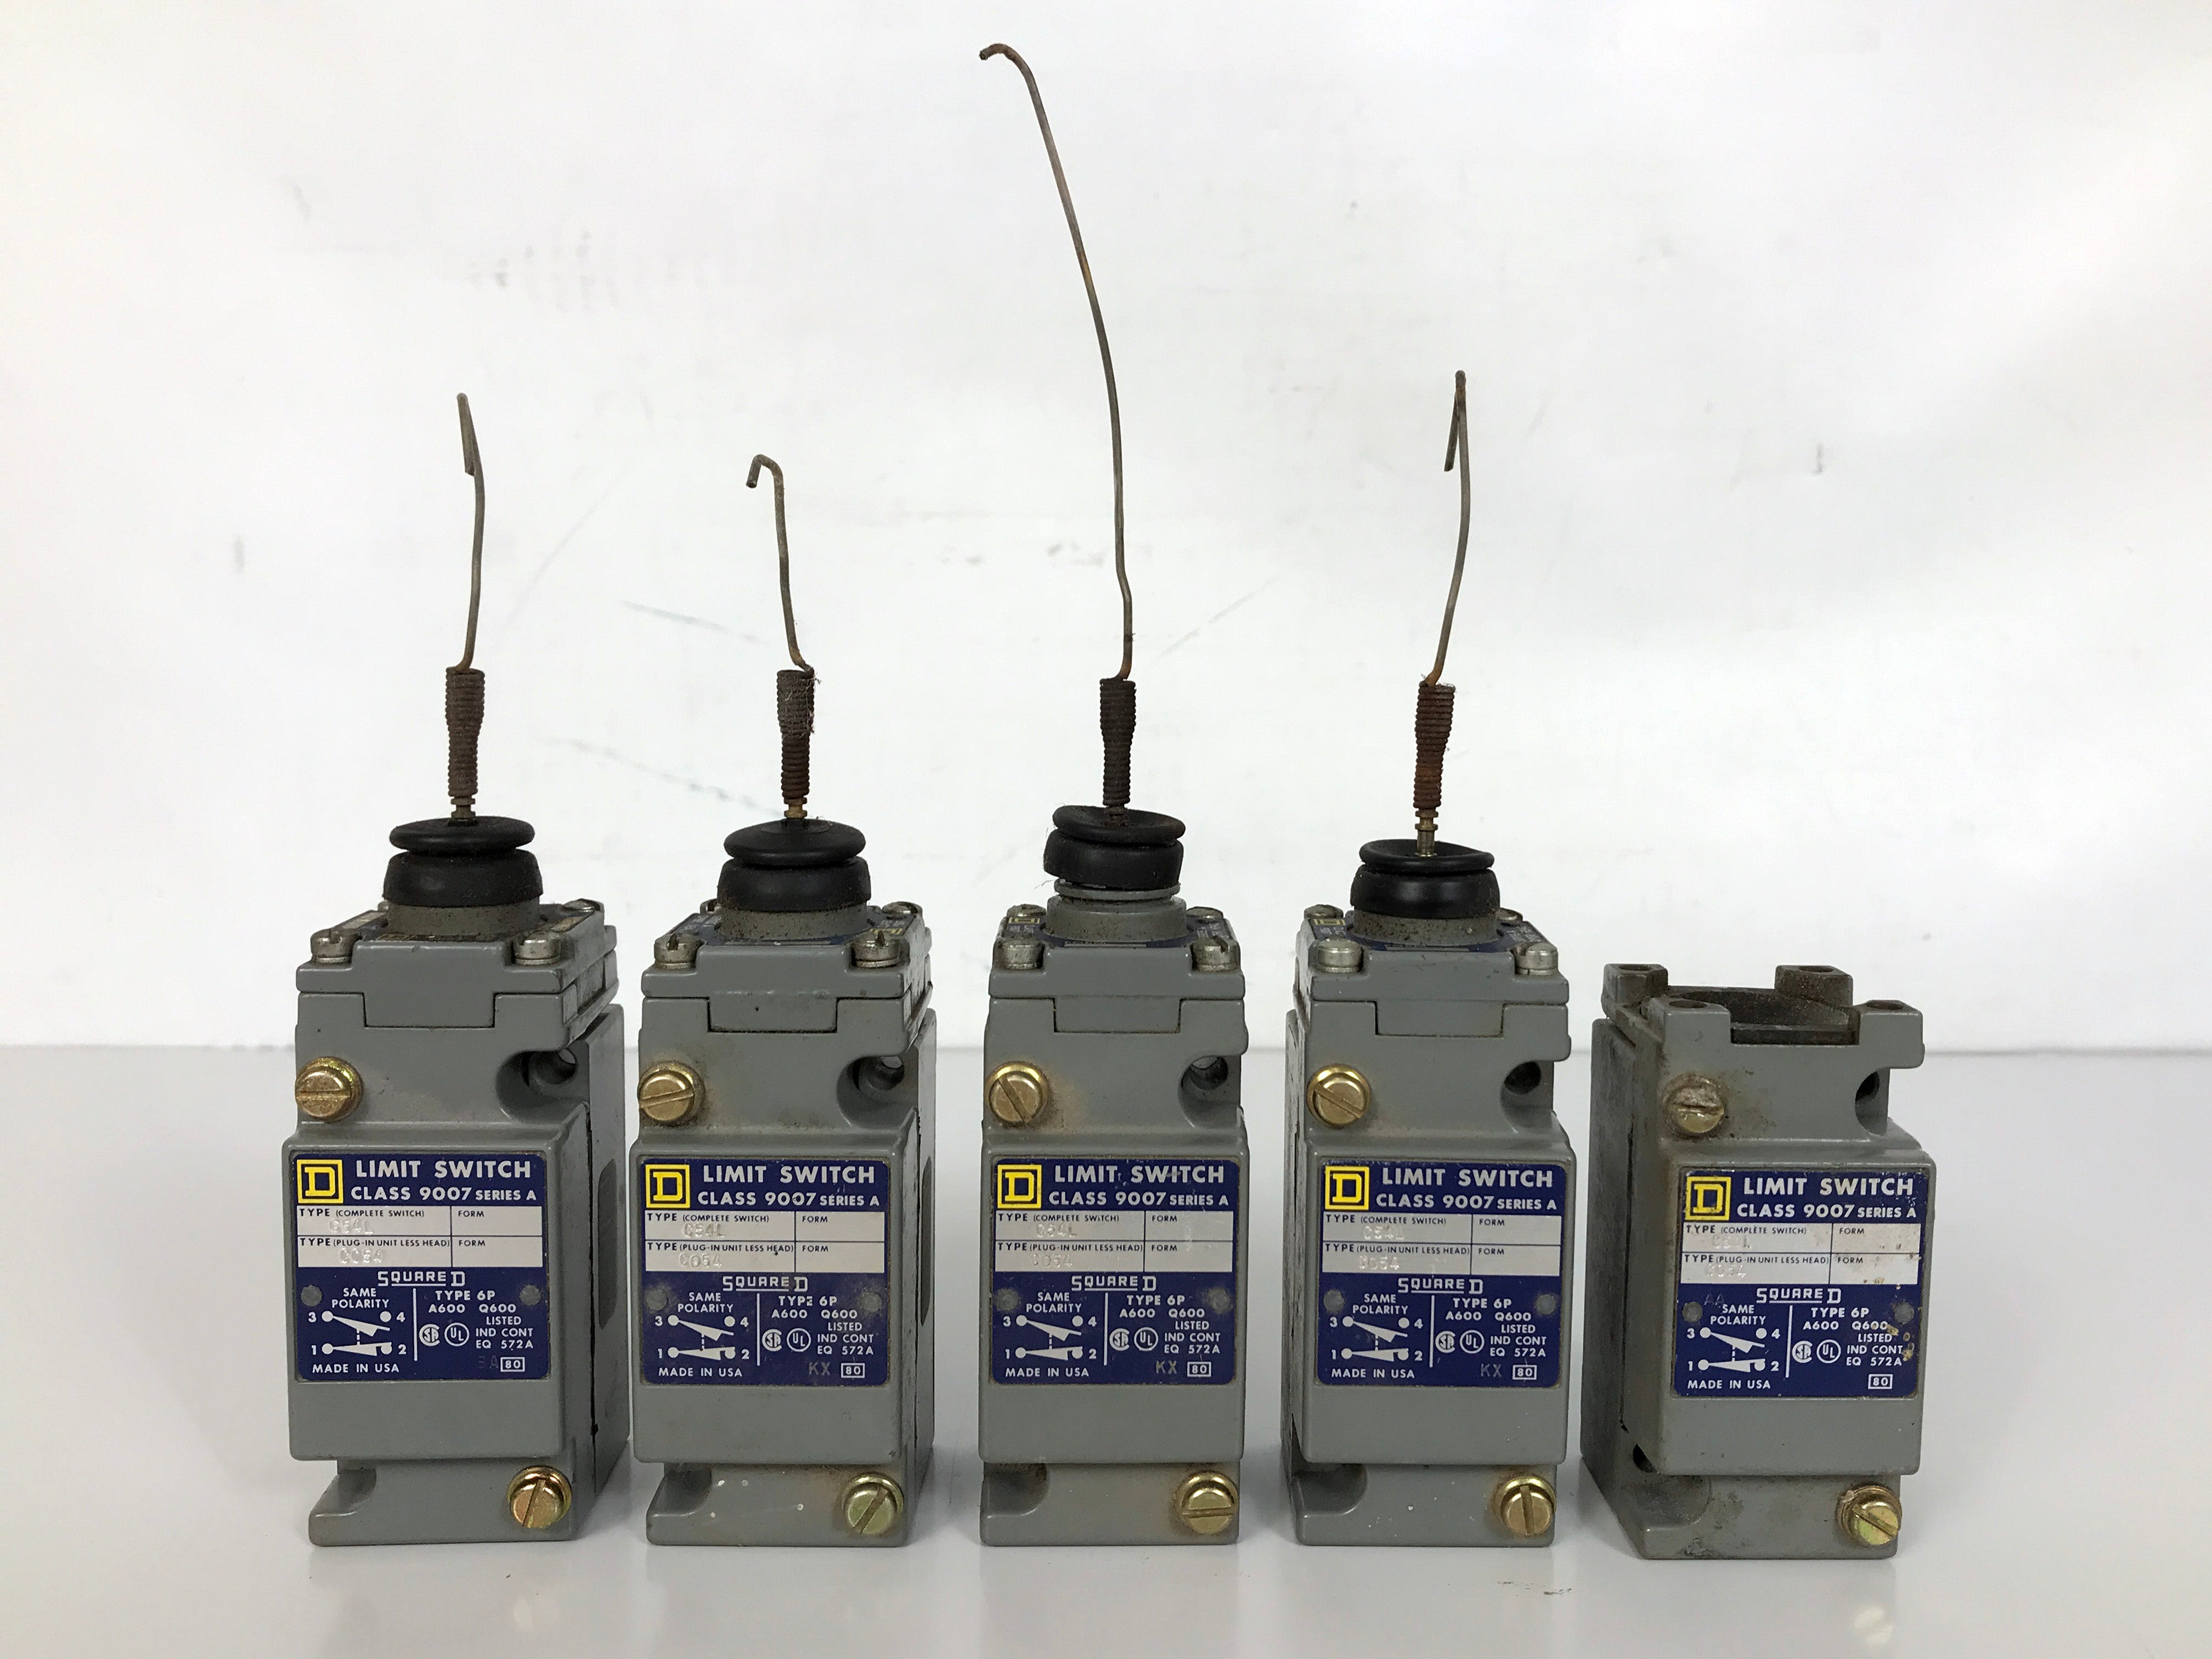 Lot of 5 used Square D 9007 C54L Limit Switches Mechanical Turret Head